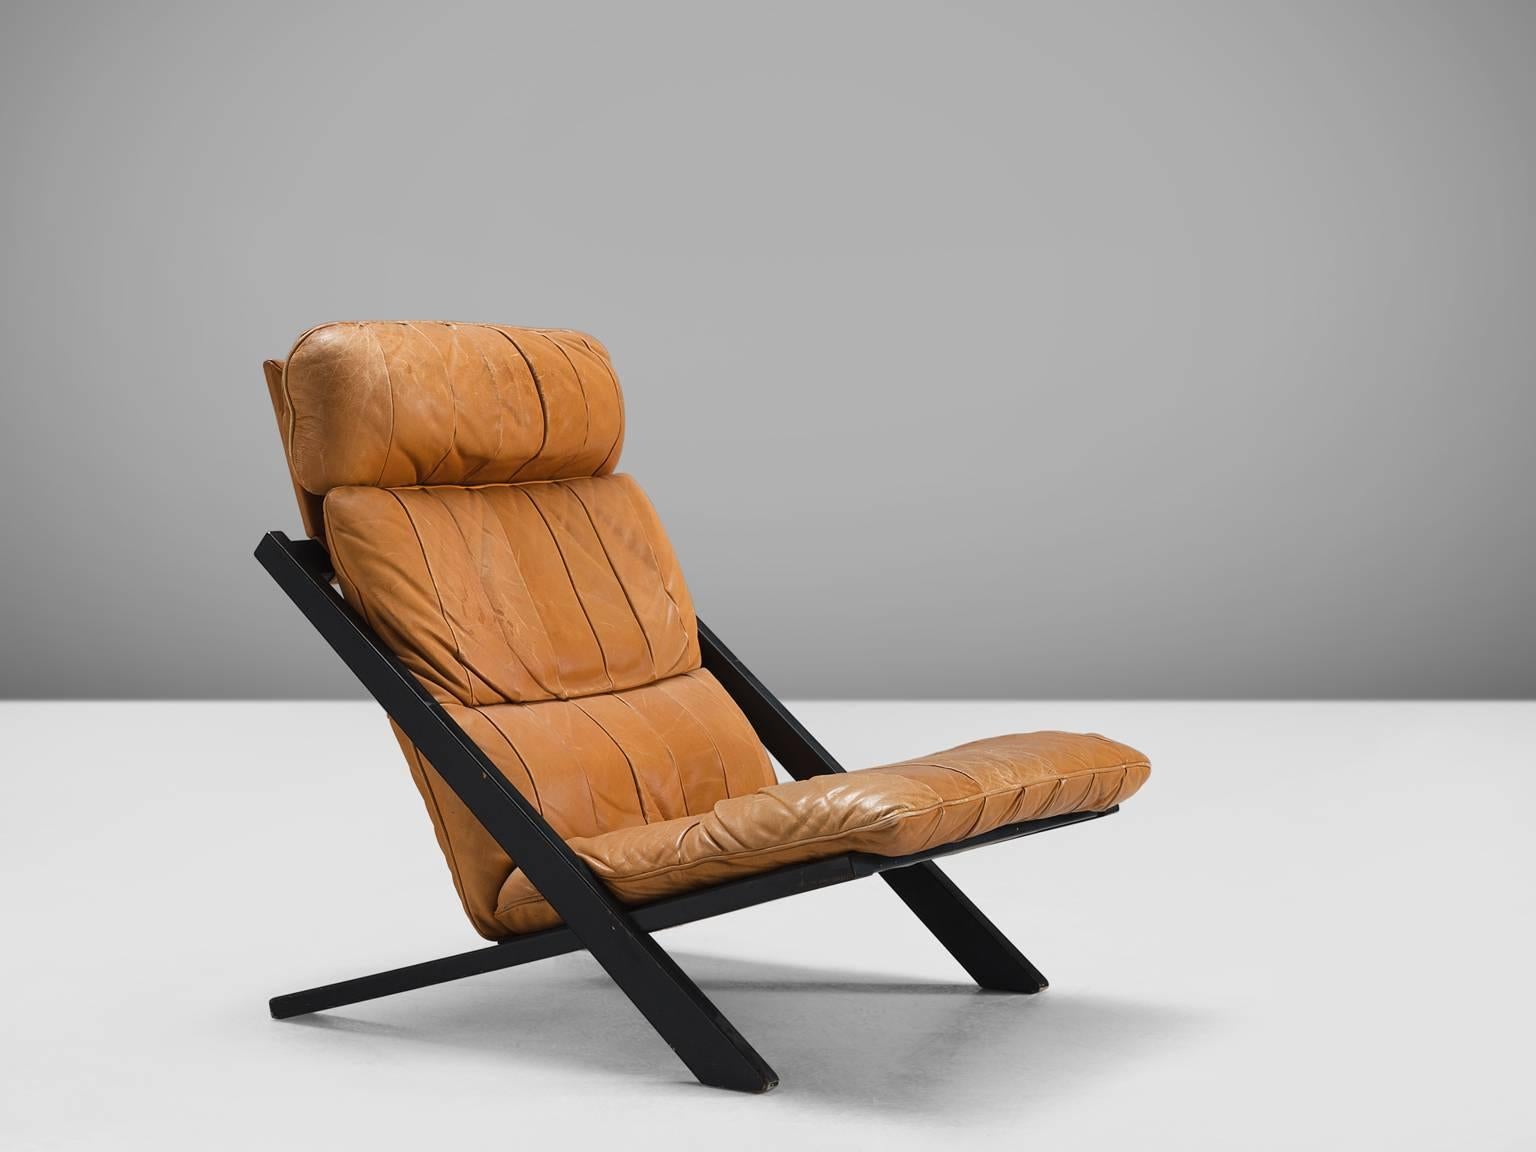 Ueli bergere for De Sede, lounge chair, Switzerland, 1970s.

High back lounge chair by de Swiss quality manufacturer De Sede. The X-shaped frame consists of black lacquered wood. This makes an interesting contrast to the warm patinated cognac brown